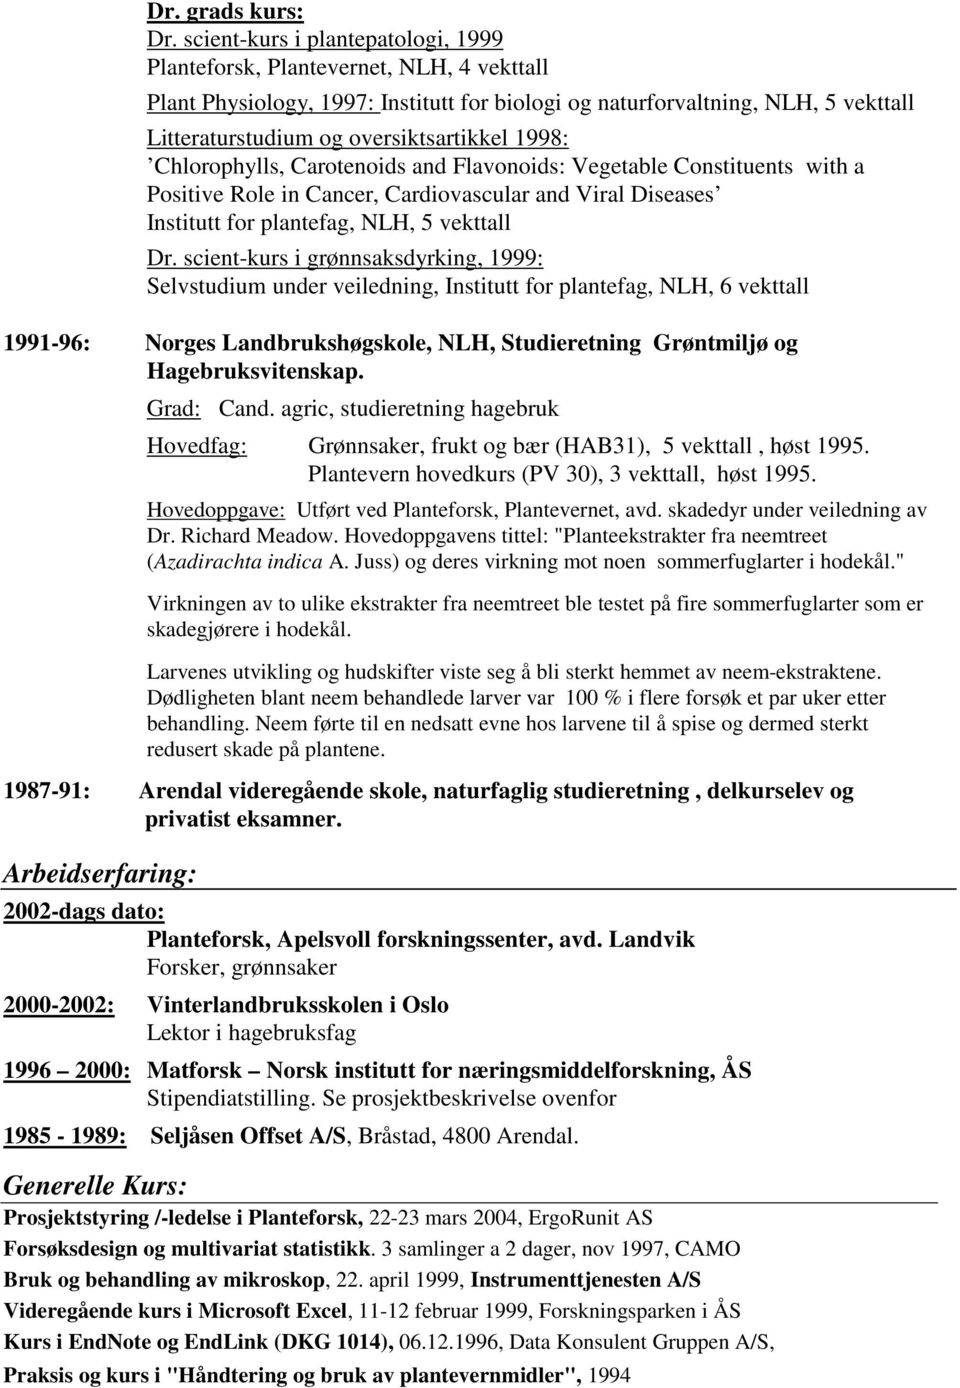 oversiktsartikkel 1998: Chlorophylls, Carotenoids and Flavonoids: Vegetable Constituents with a Positive Role in Cancer, Cardiovascular and Viral Diseases Institutt for plantefag, NLH, 5 vekttall